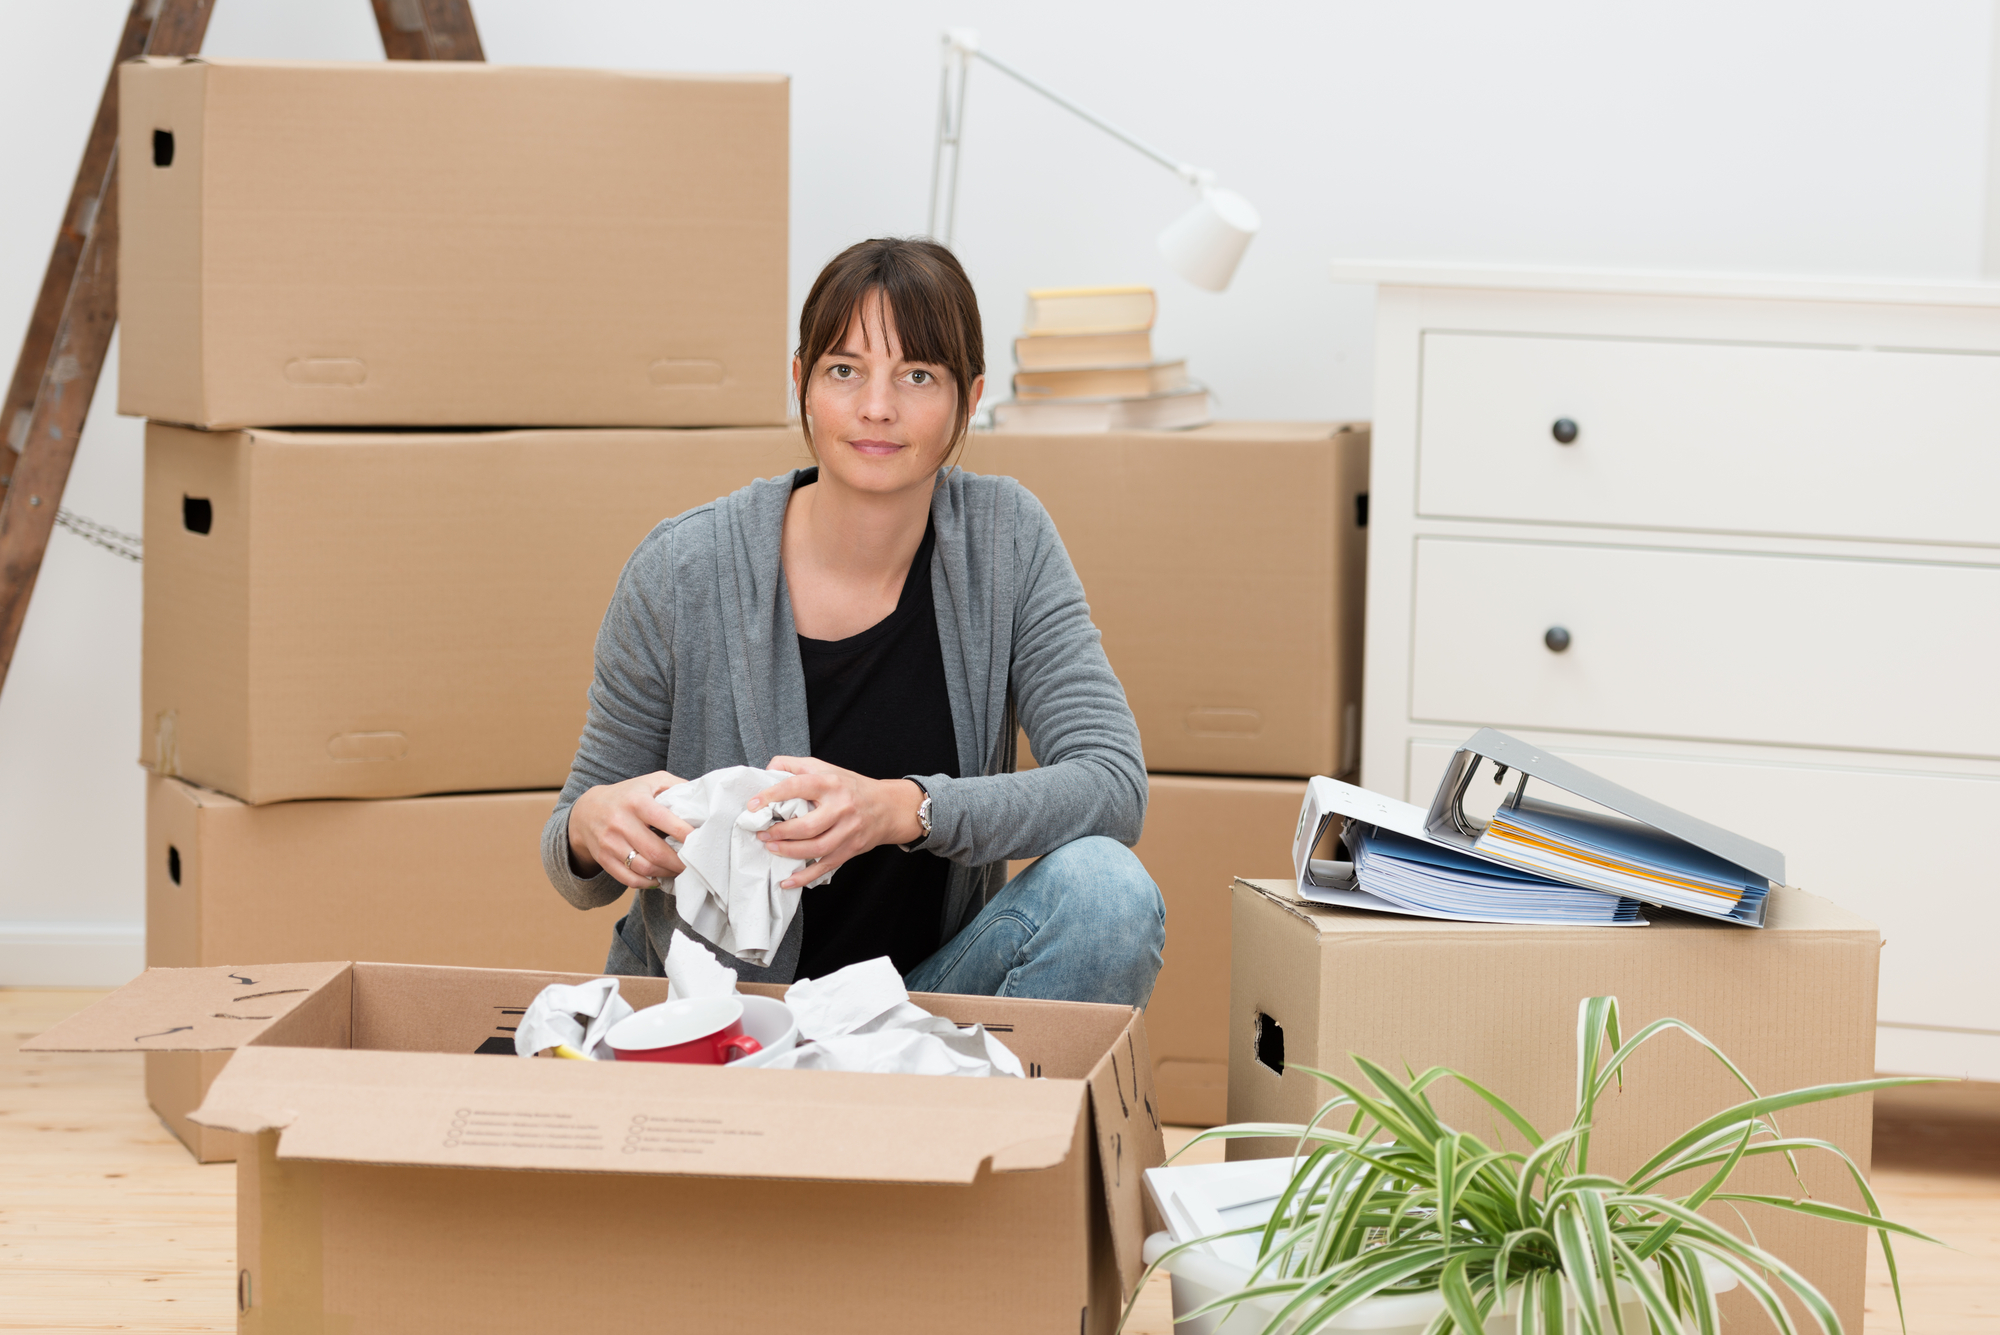 Woman moving house packing her belongings